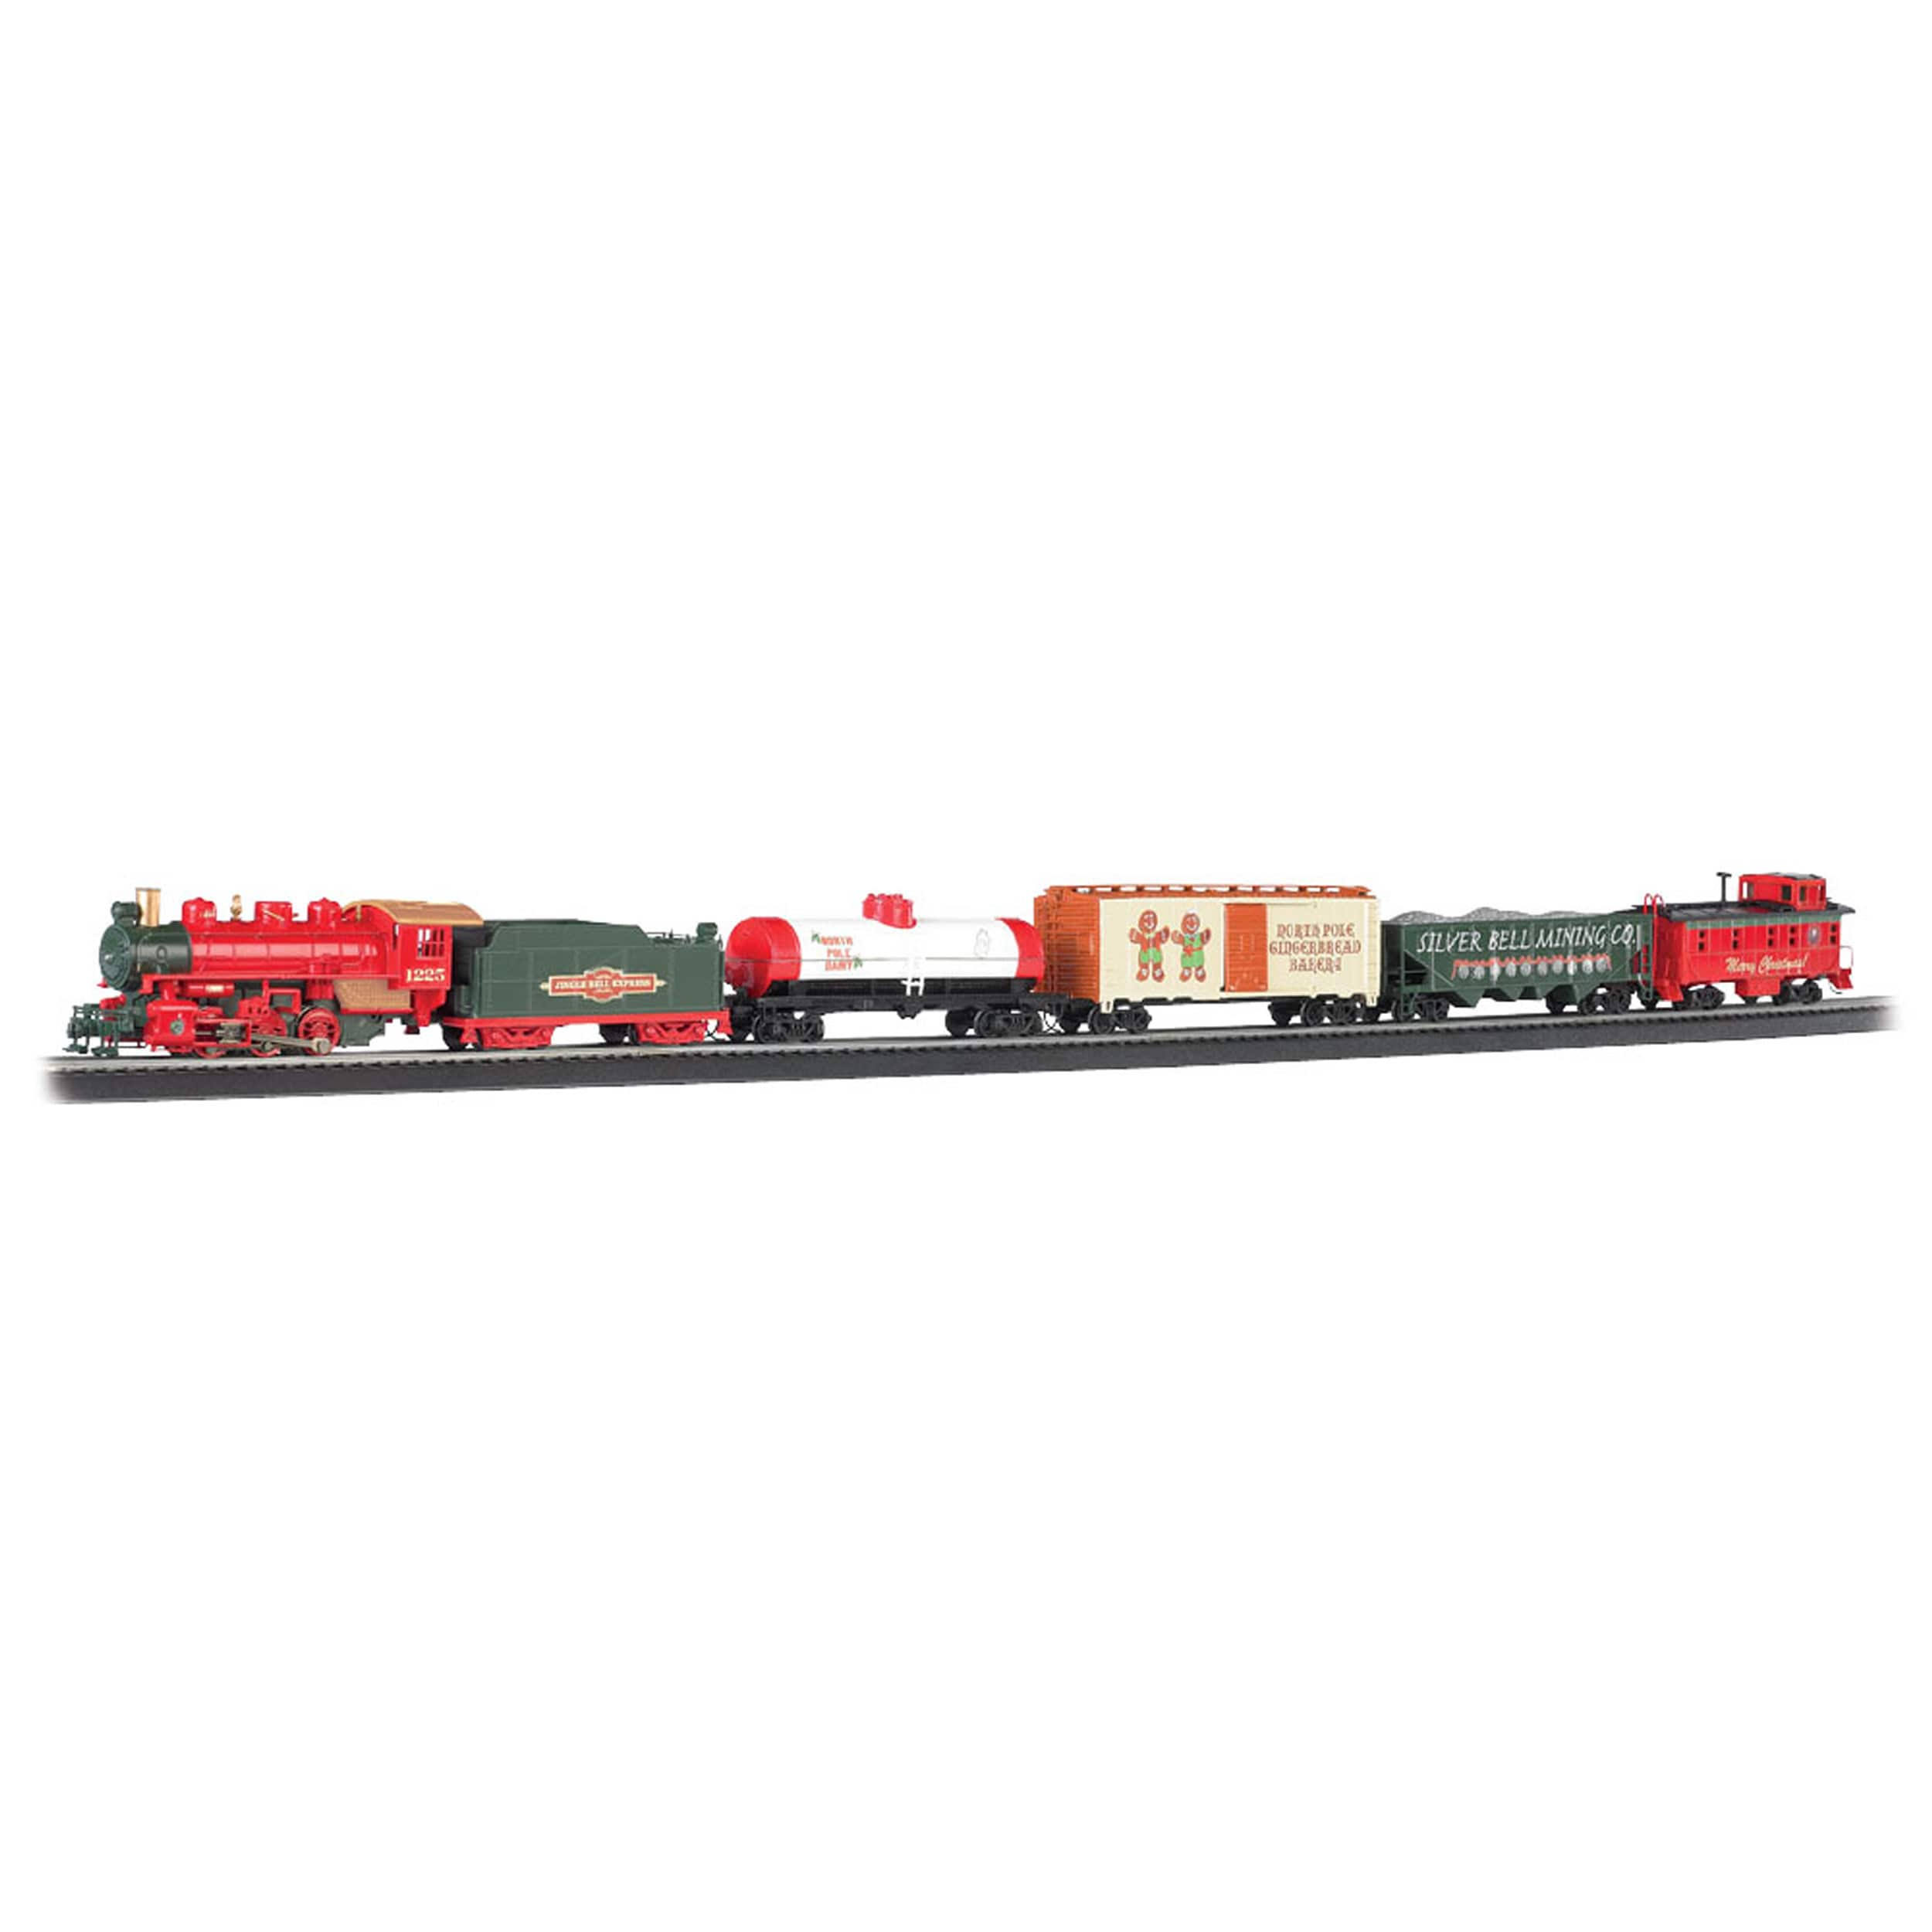 Bachmann Industries Jingle Bell Express Ready To Run Electric Train Toyset